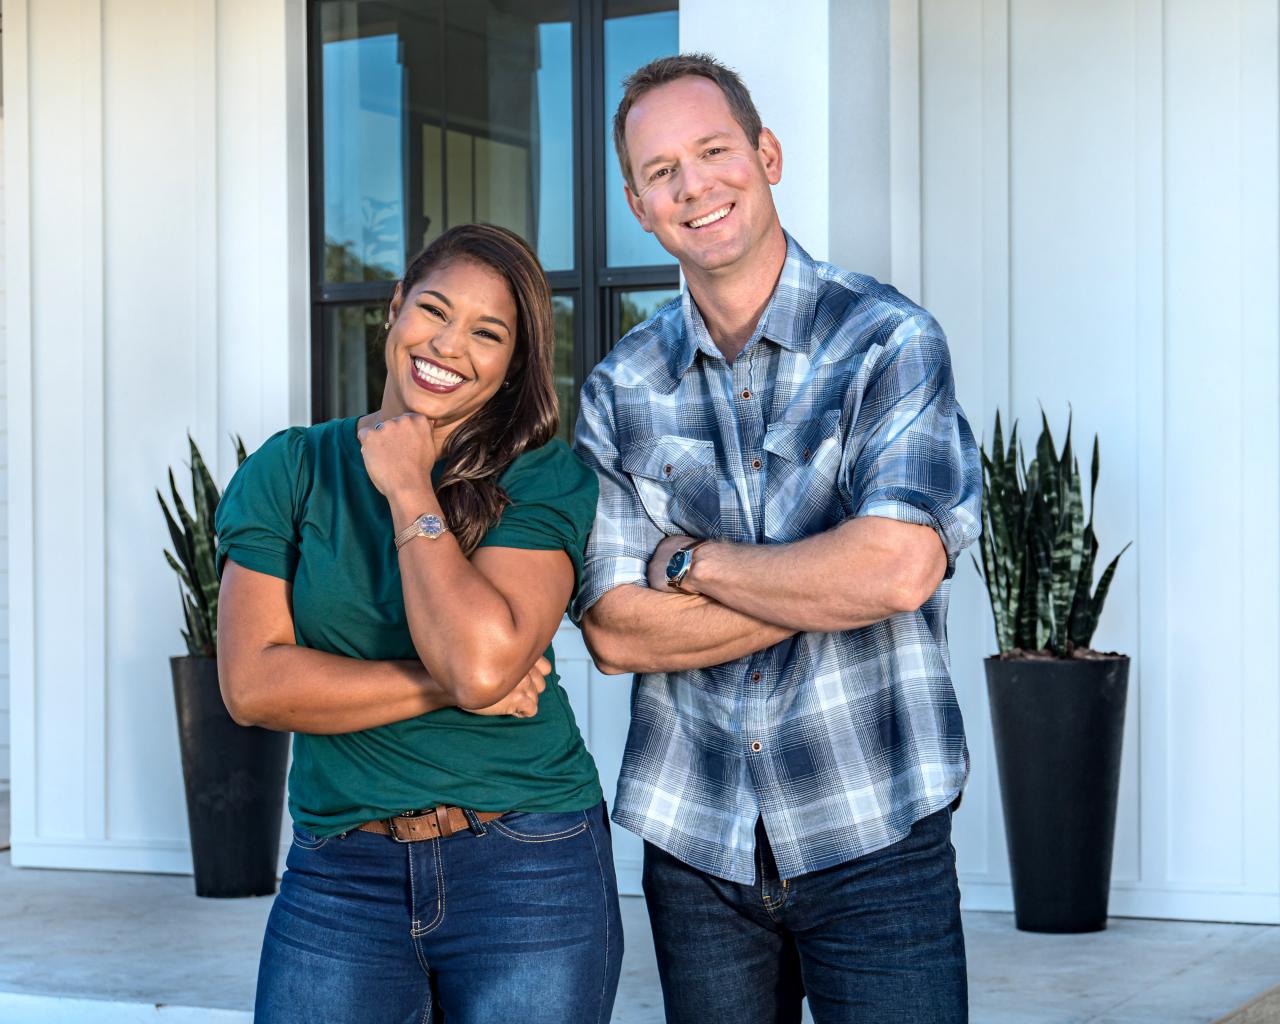 How Did HGTV Couples Meet?, Latest HGTV Show, Star and Celebrity News